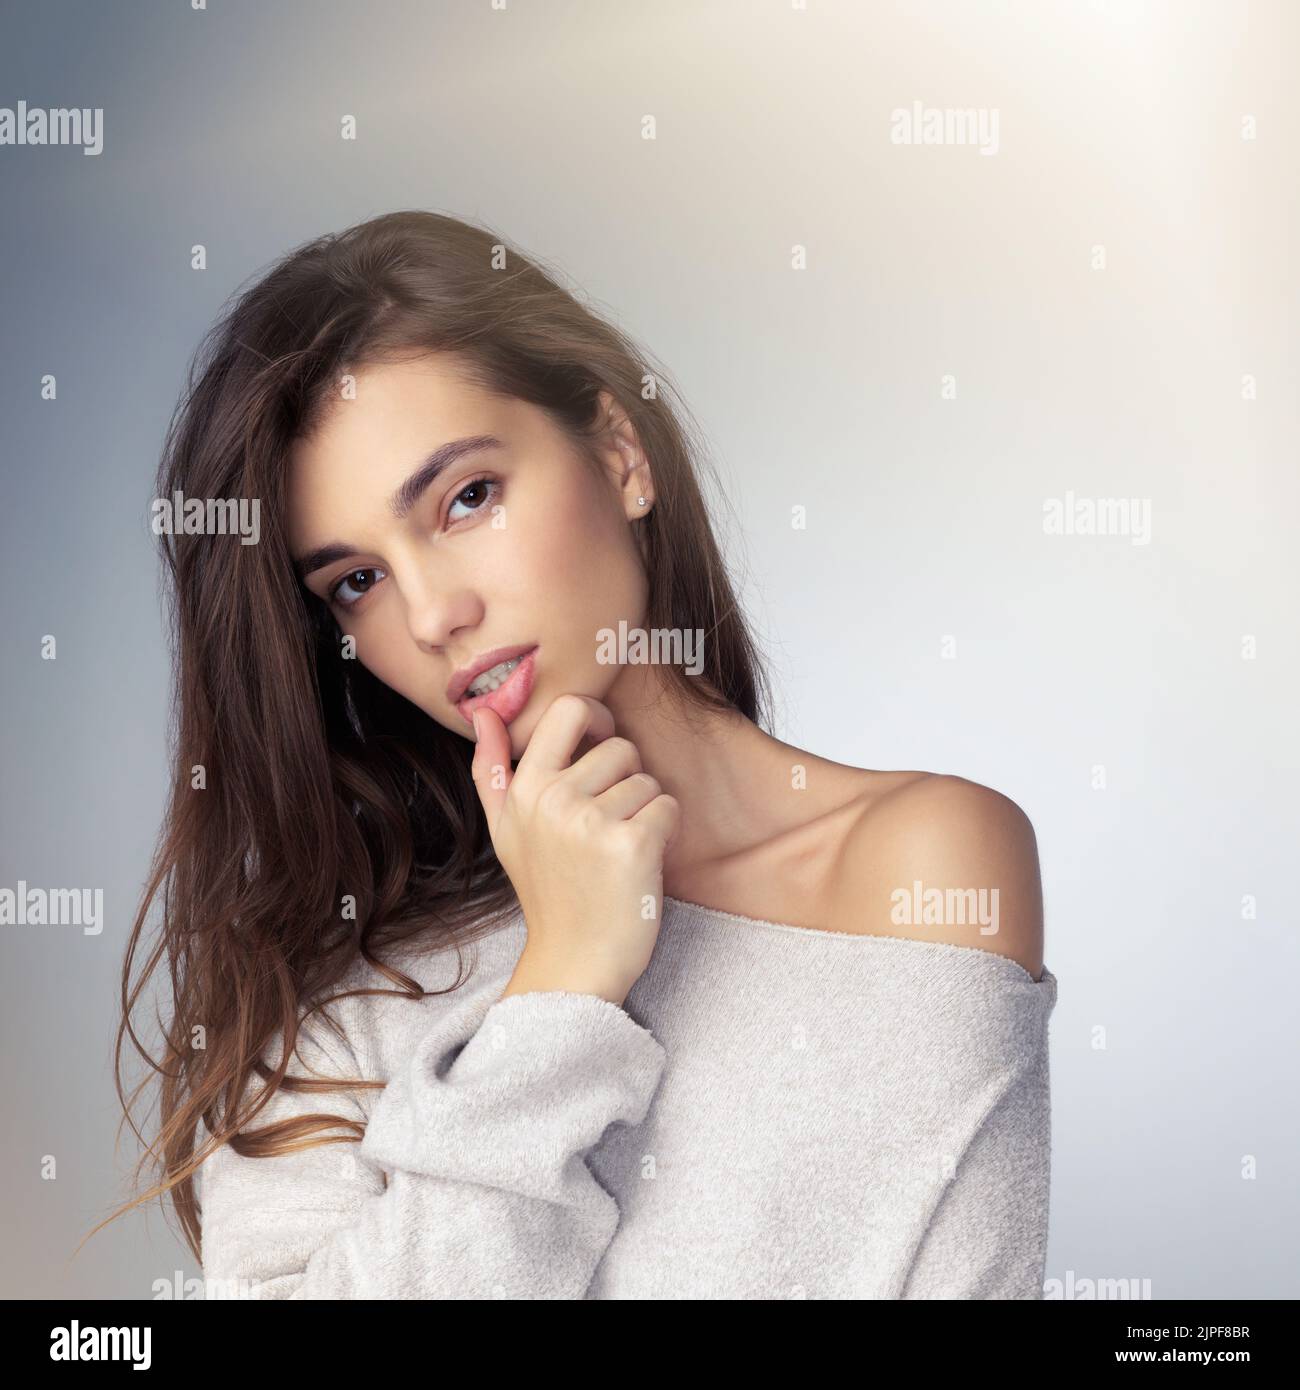 The definition of simplistic beauty. Studio shot of a beautiful young woman posing against a gray background. Stock Photo